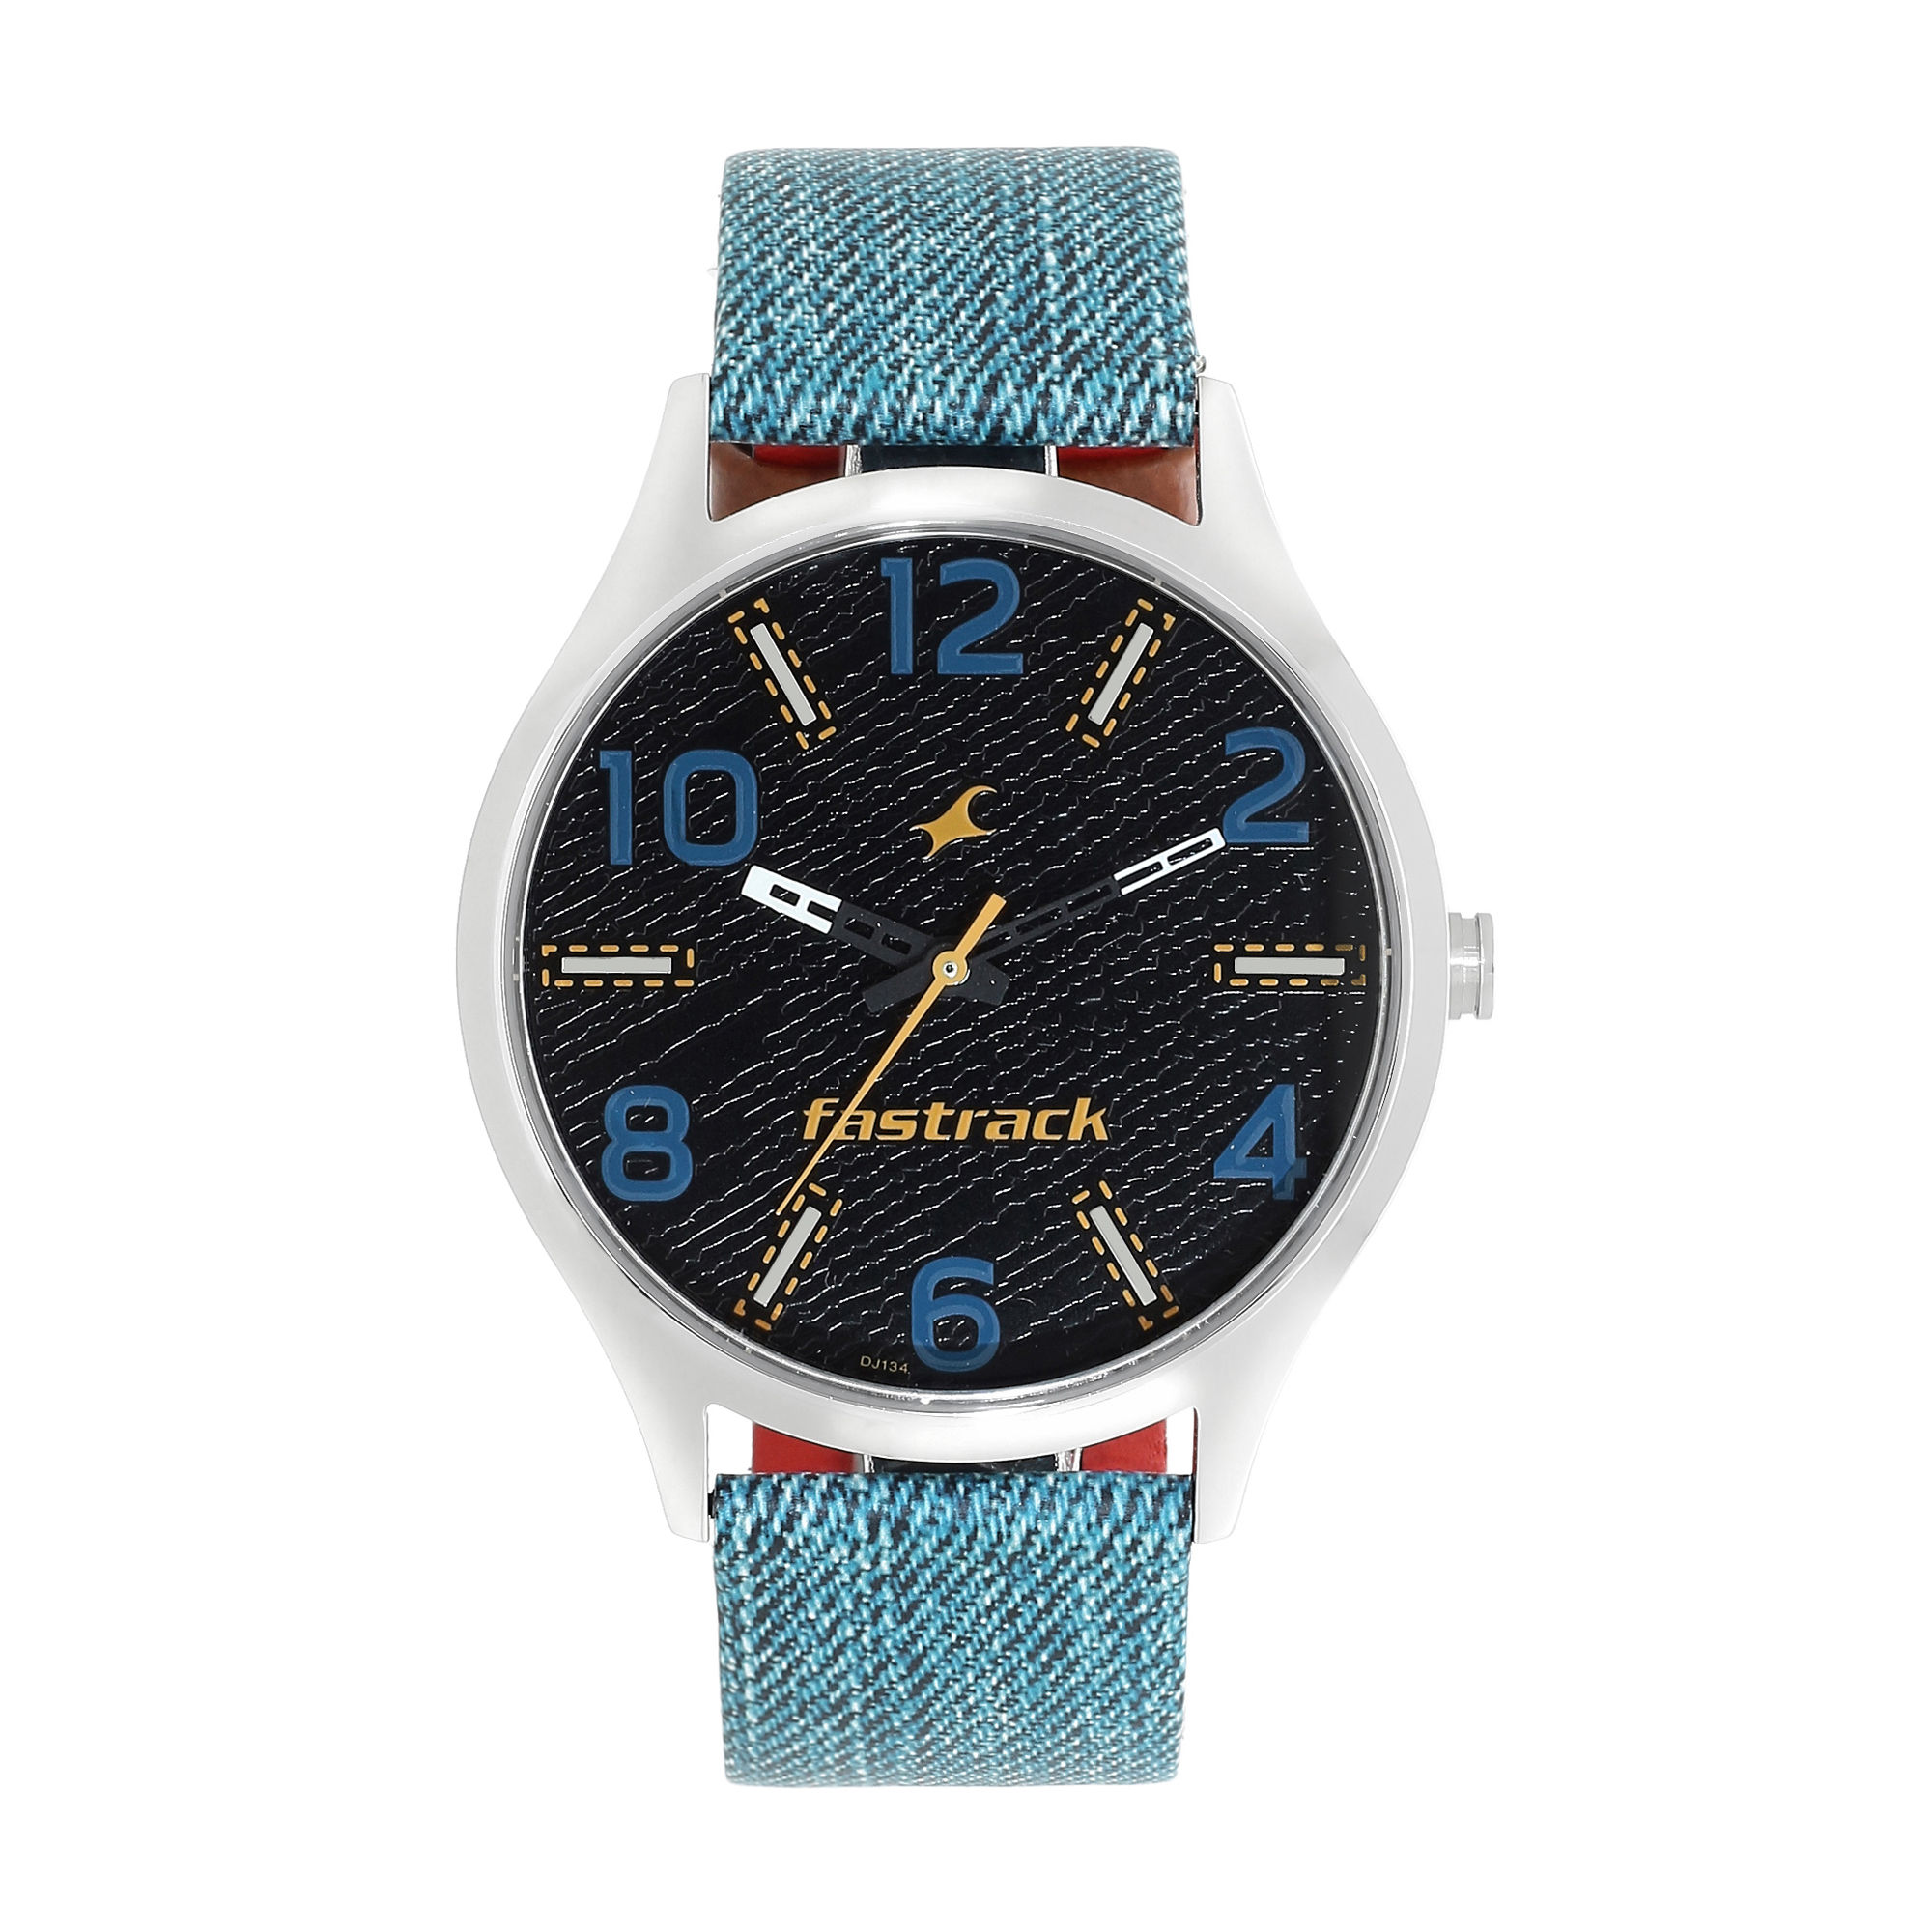 H.M Watch CO - The new Denim Collection in Fastrack ...now... | Facebook